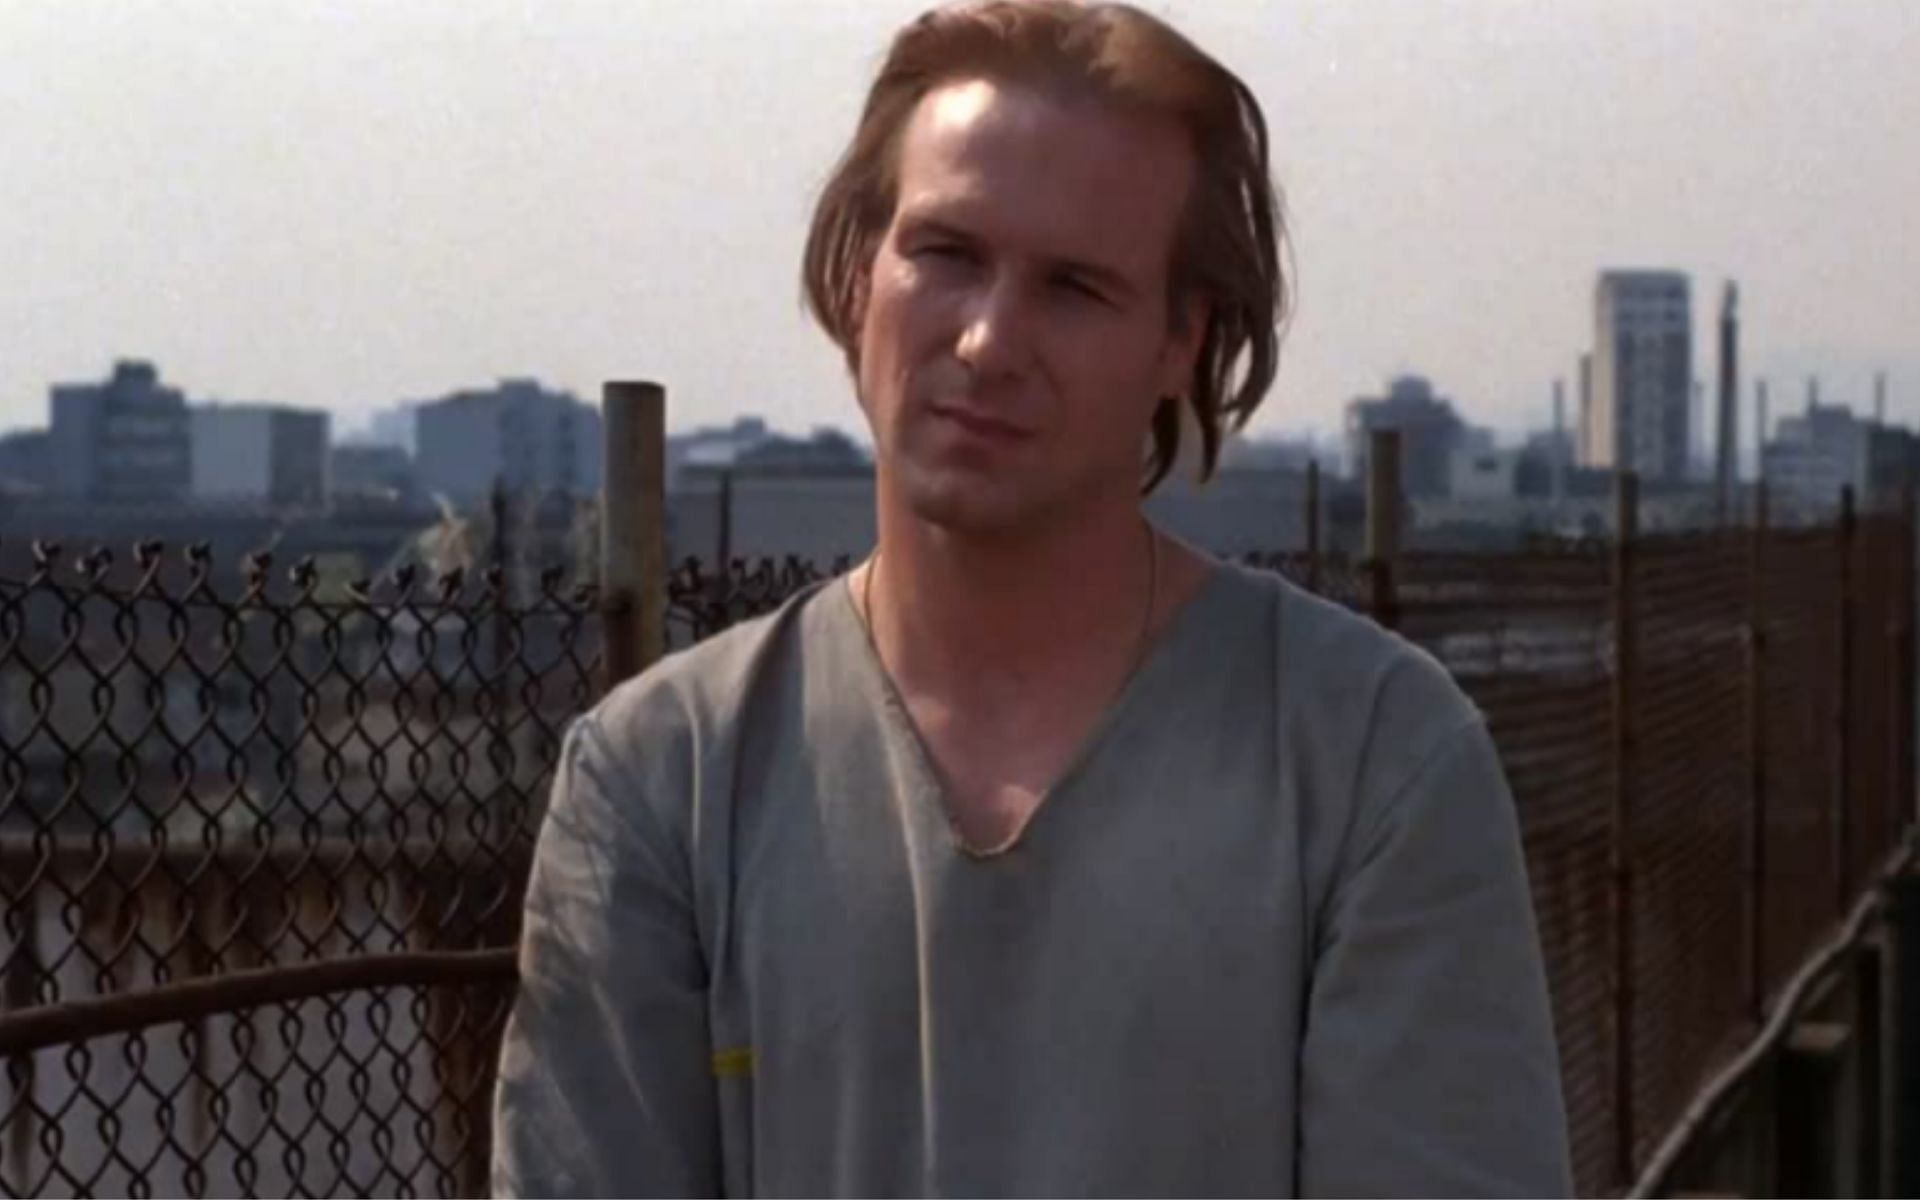 William Hurt in Kiss of the Spider Woman (Image via IMDb)